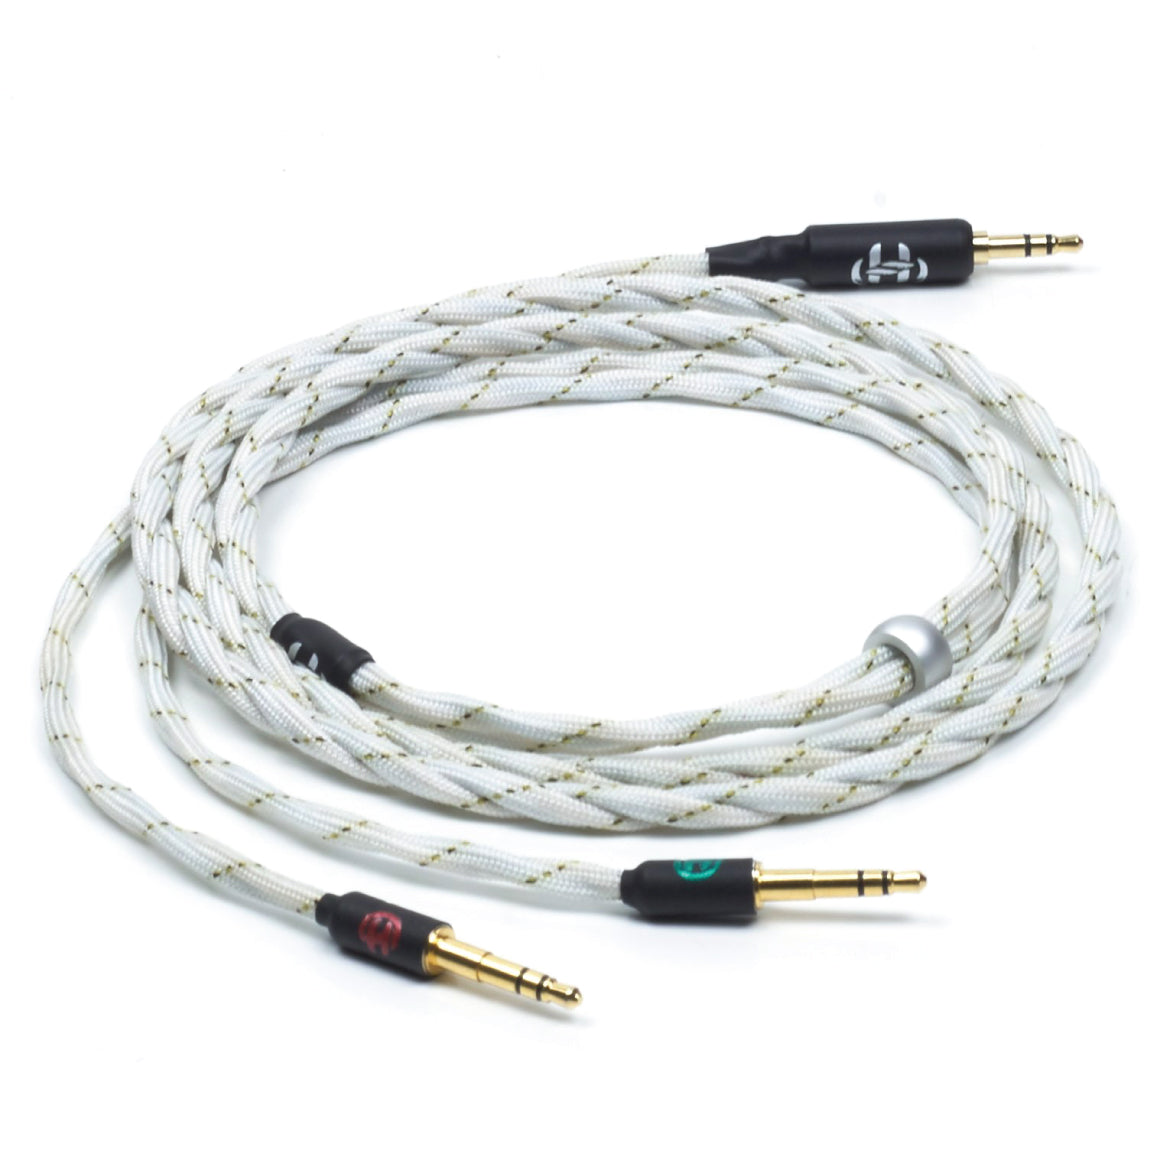 Headphone-Zone-Headgear Audio - Upgrade Cable for Beyerdynamic T1 2nd Generation / T5p Second Generation/ Sleeved - 2.5mm TRRS Balanced For A&K And Onkyo